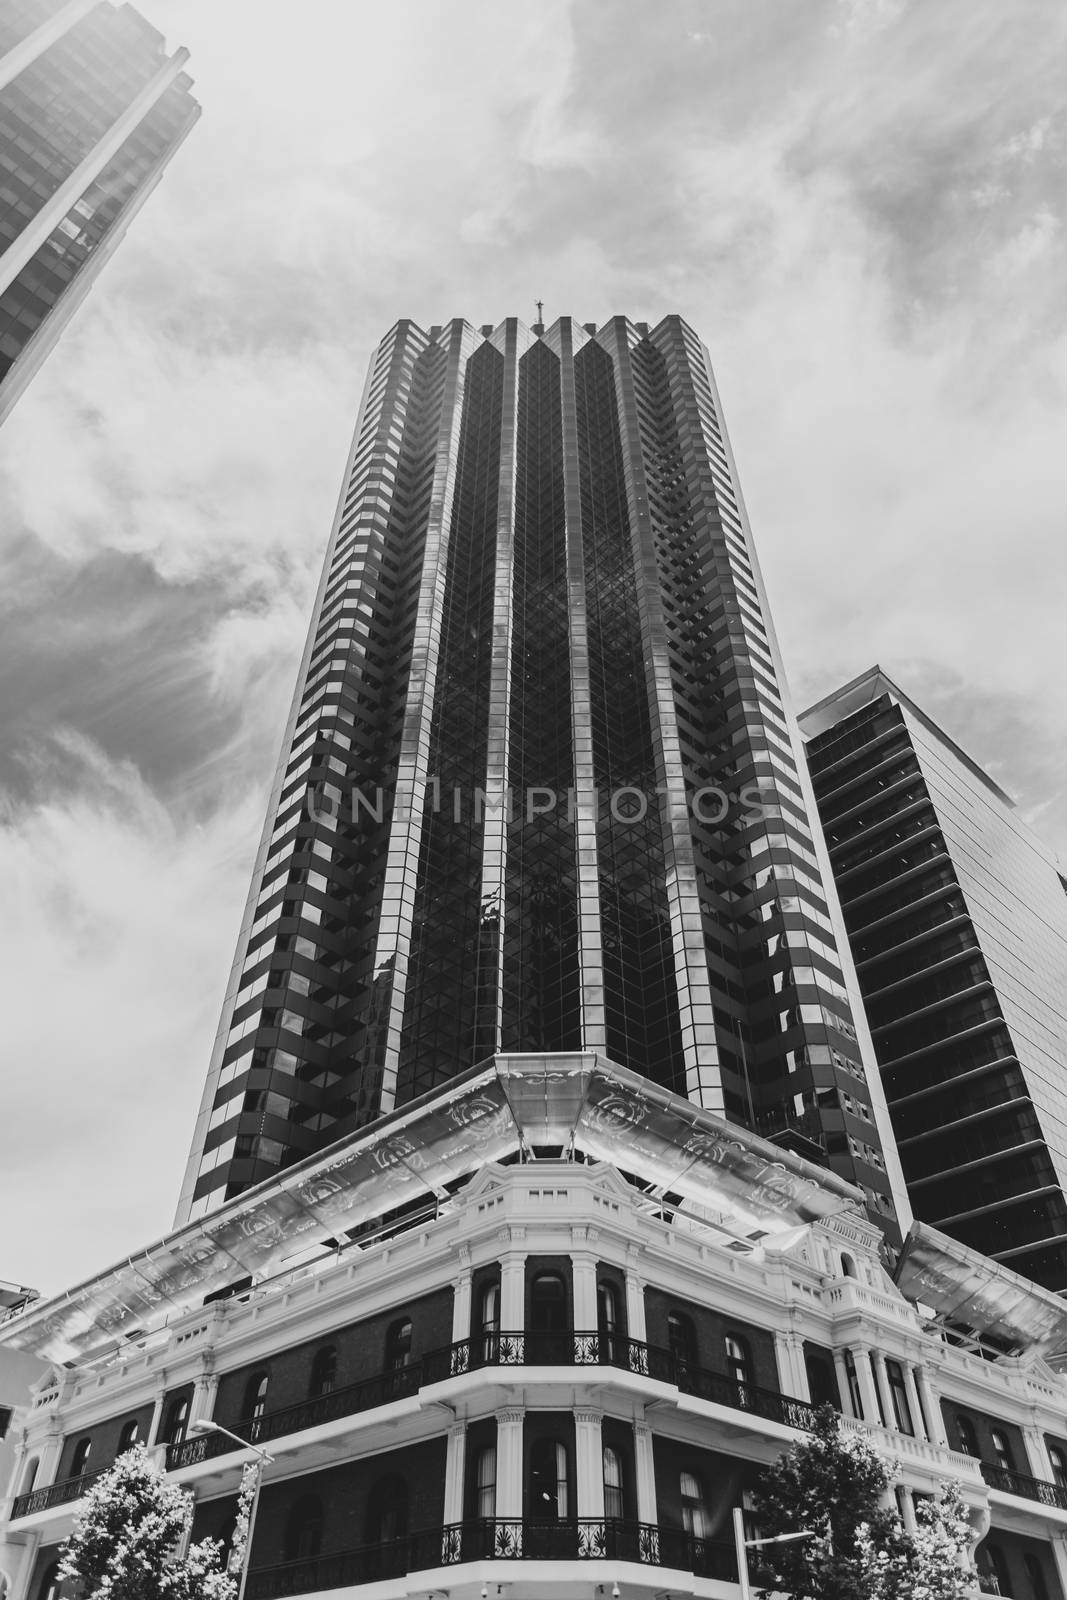 Black and White of old Victorian brick building in front of modern highrise skyscraper in Perth Western Australia